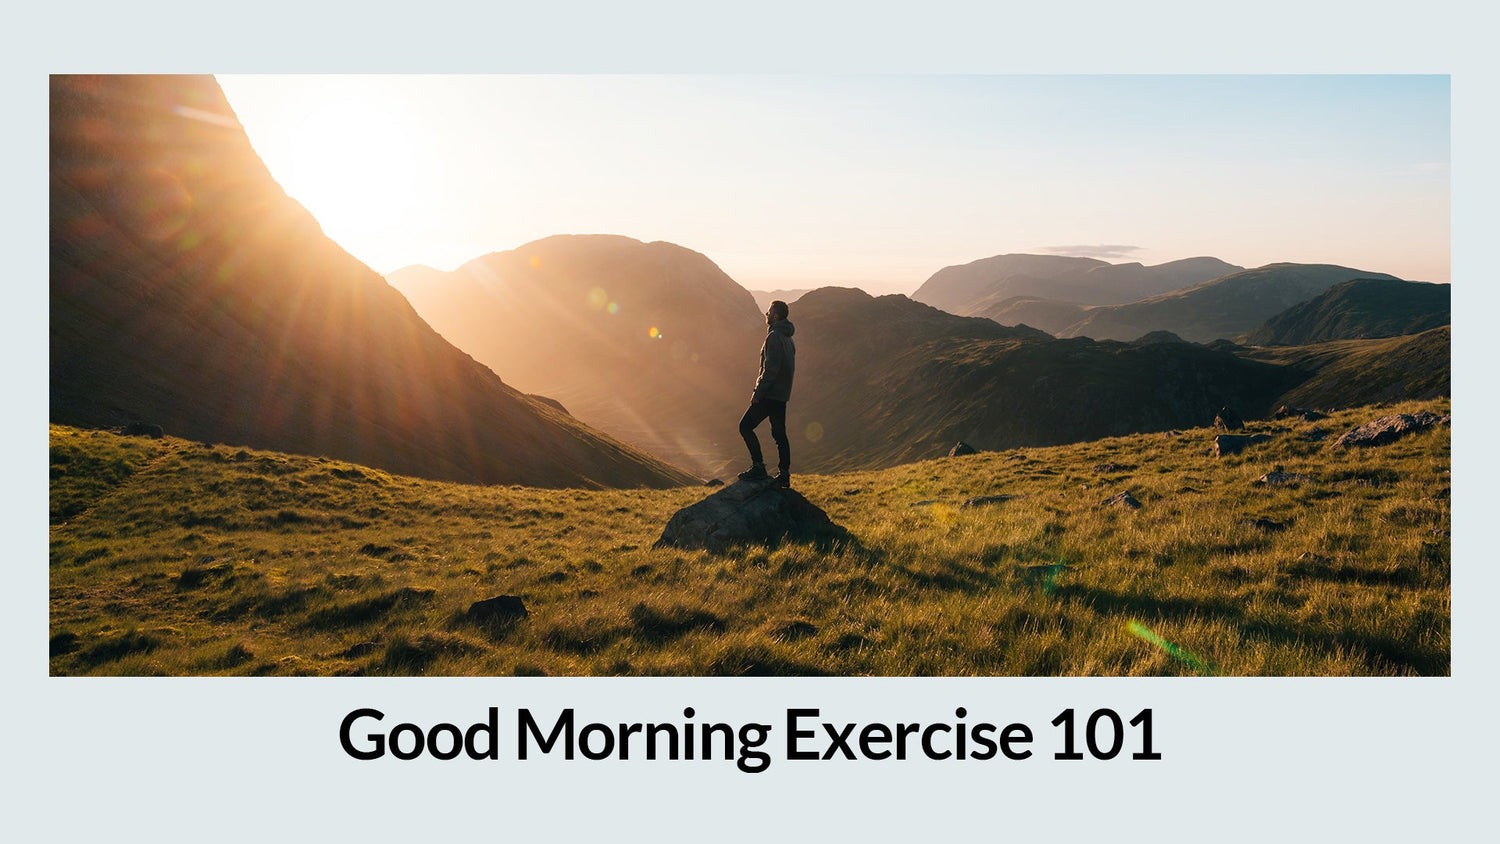 Good Morning Exercise 101